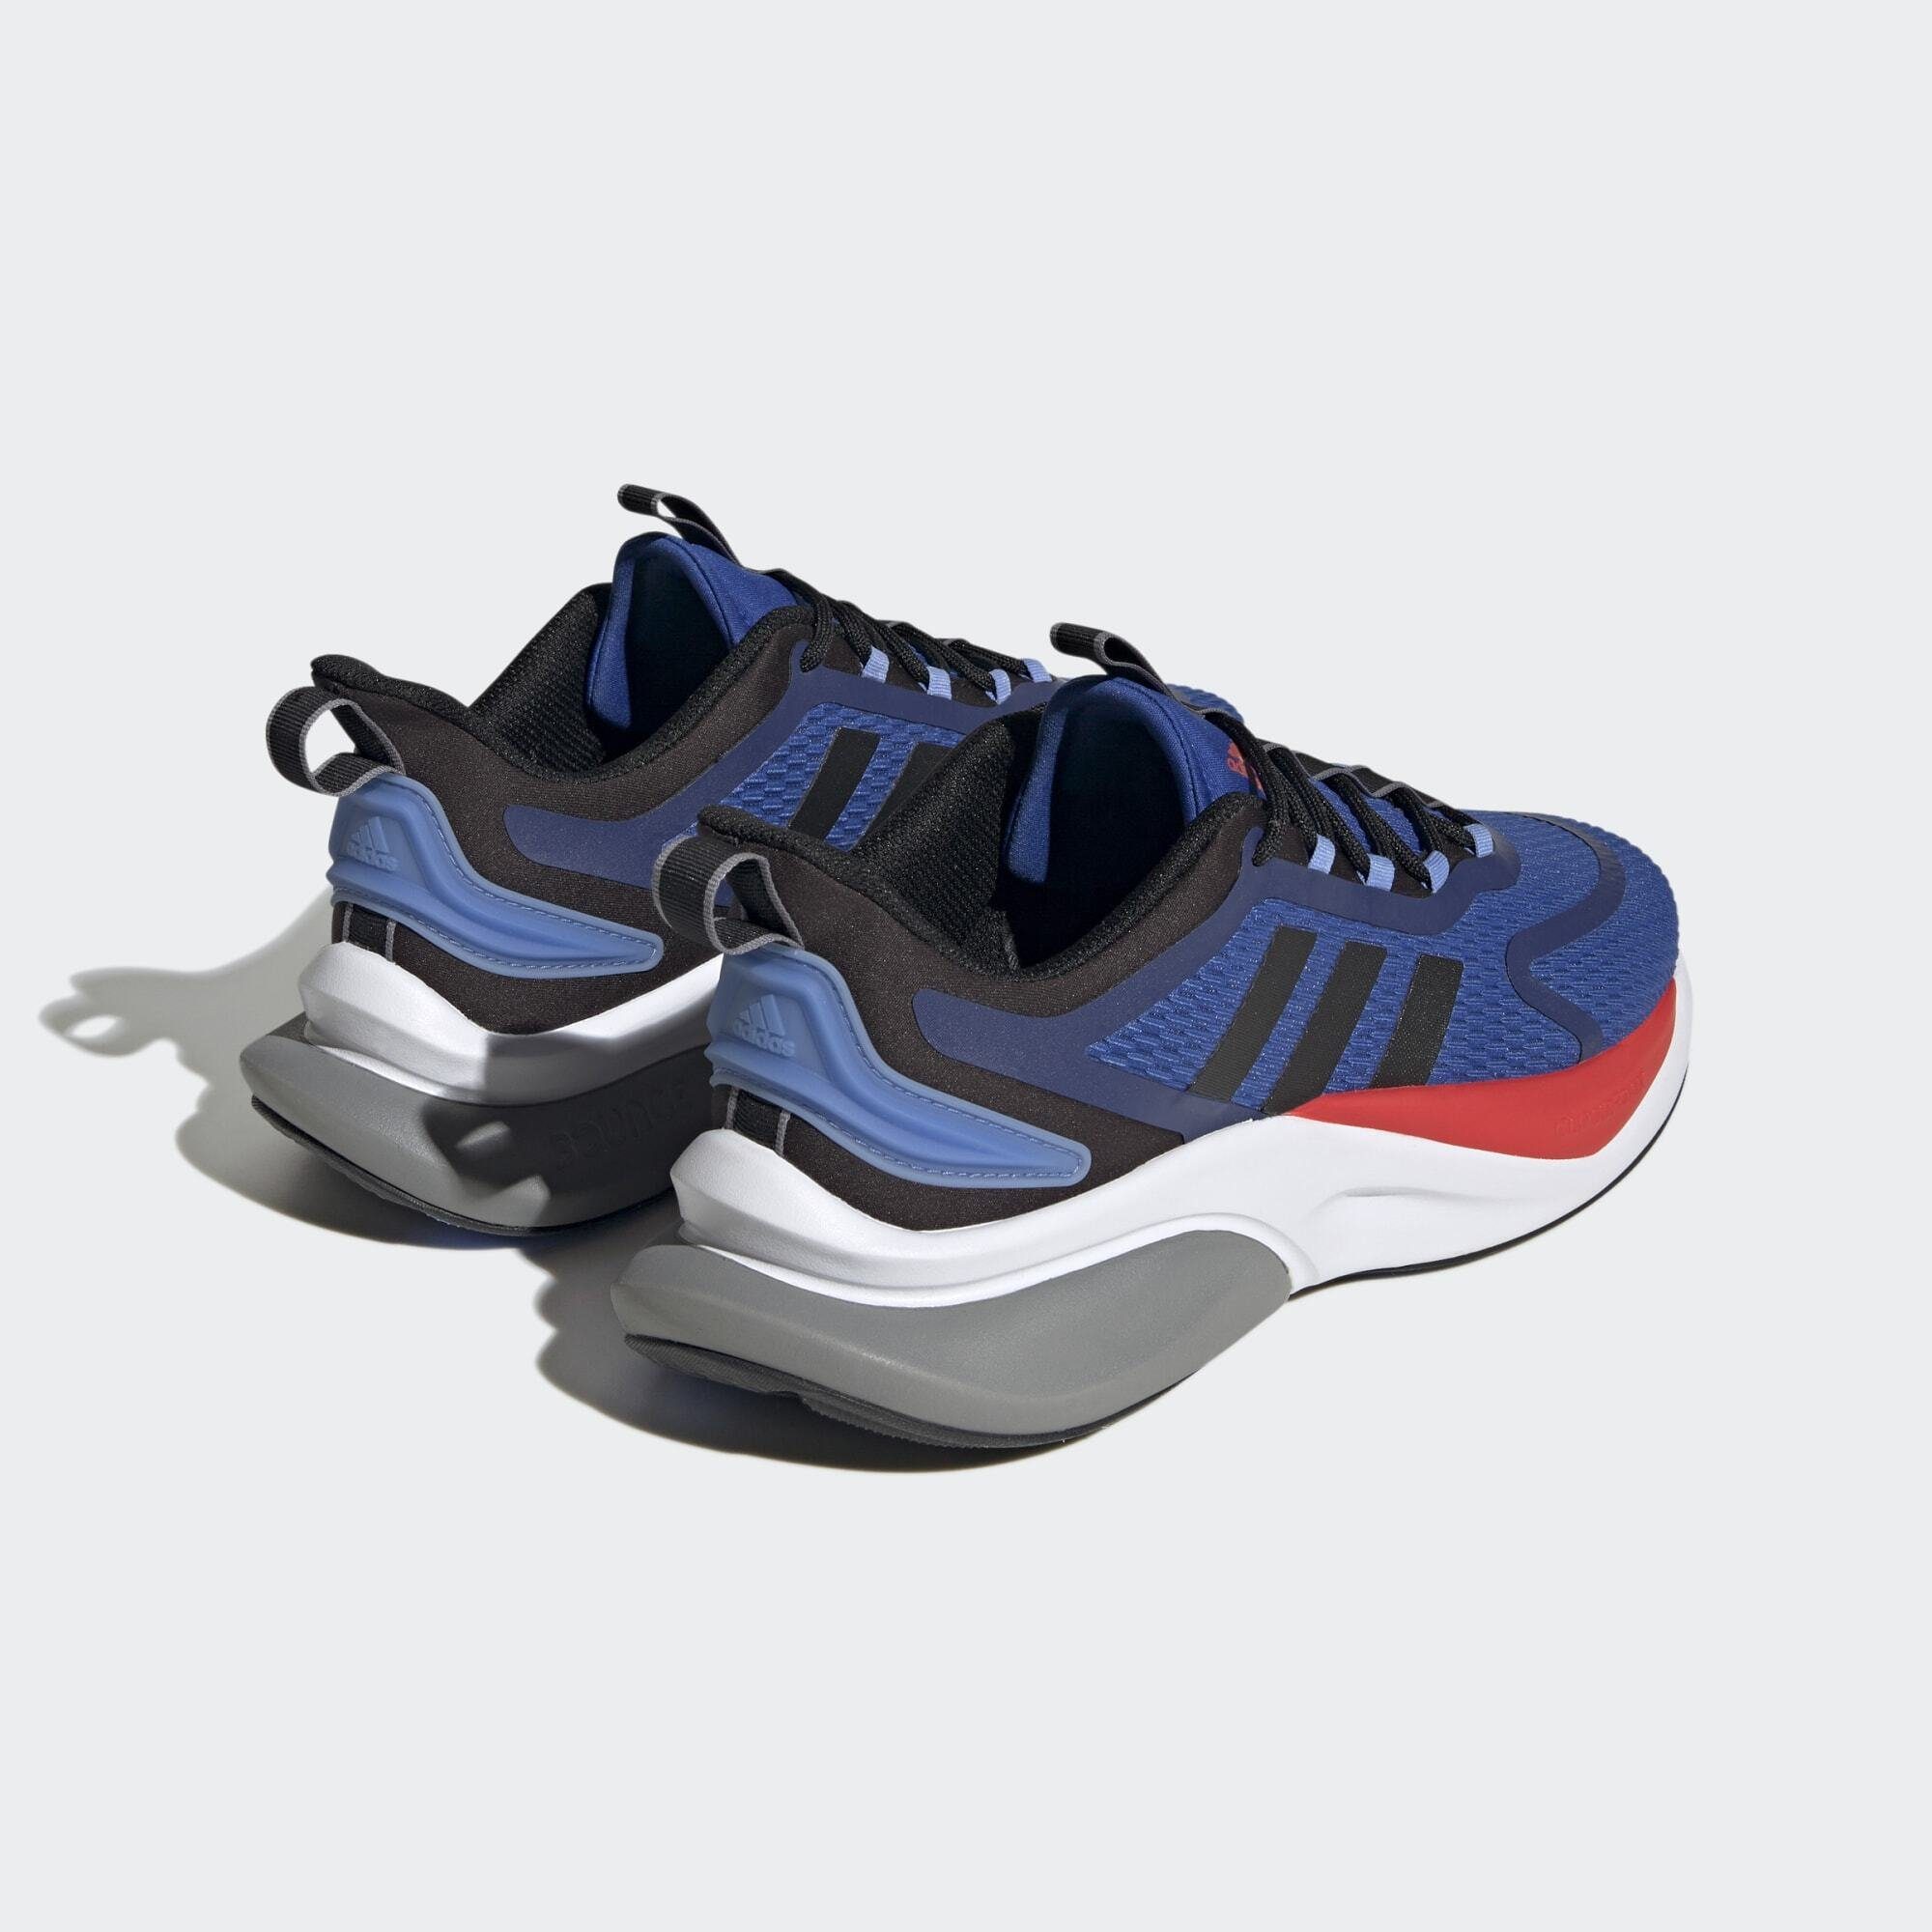 Core / Sportswear Red adidas Royal Sneaker SCHUH / BOUNCE Bright Black Blue ALPHABOUNCE+